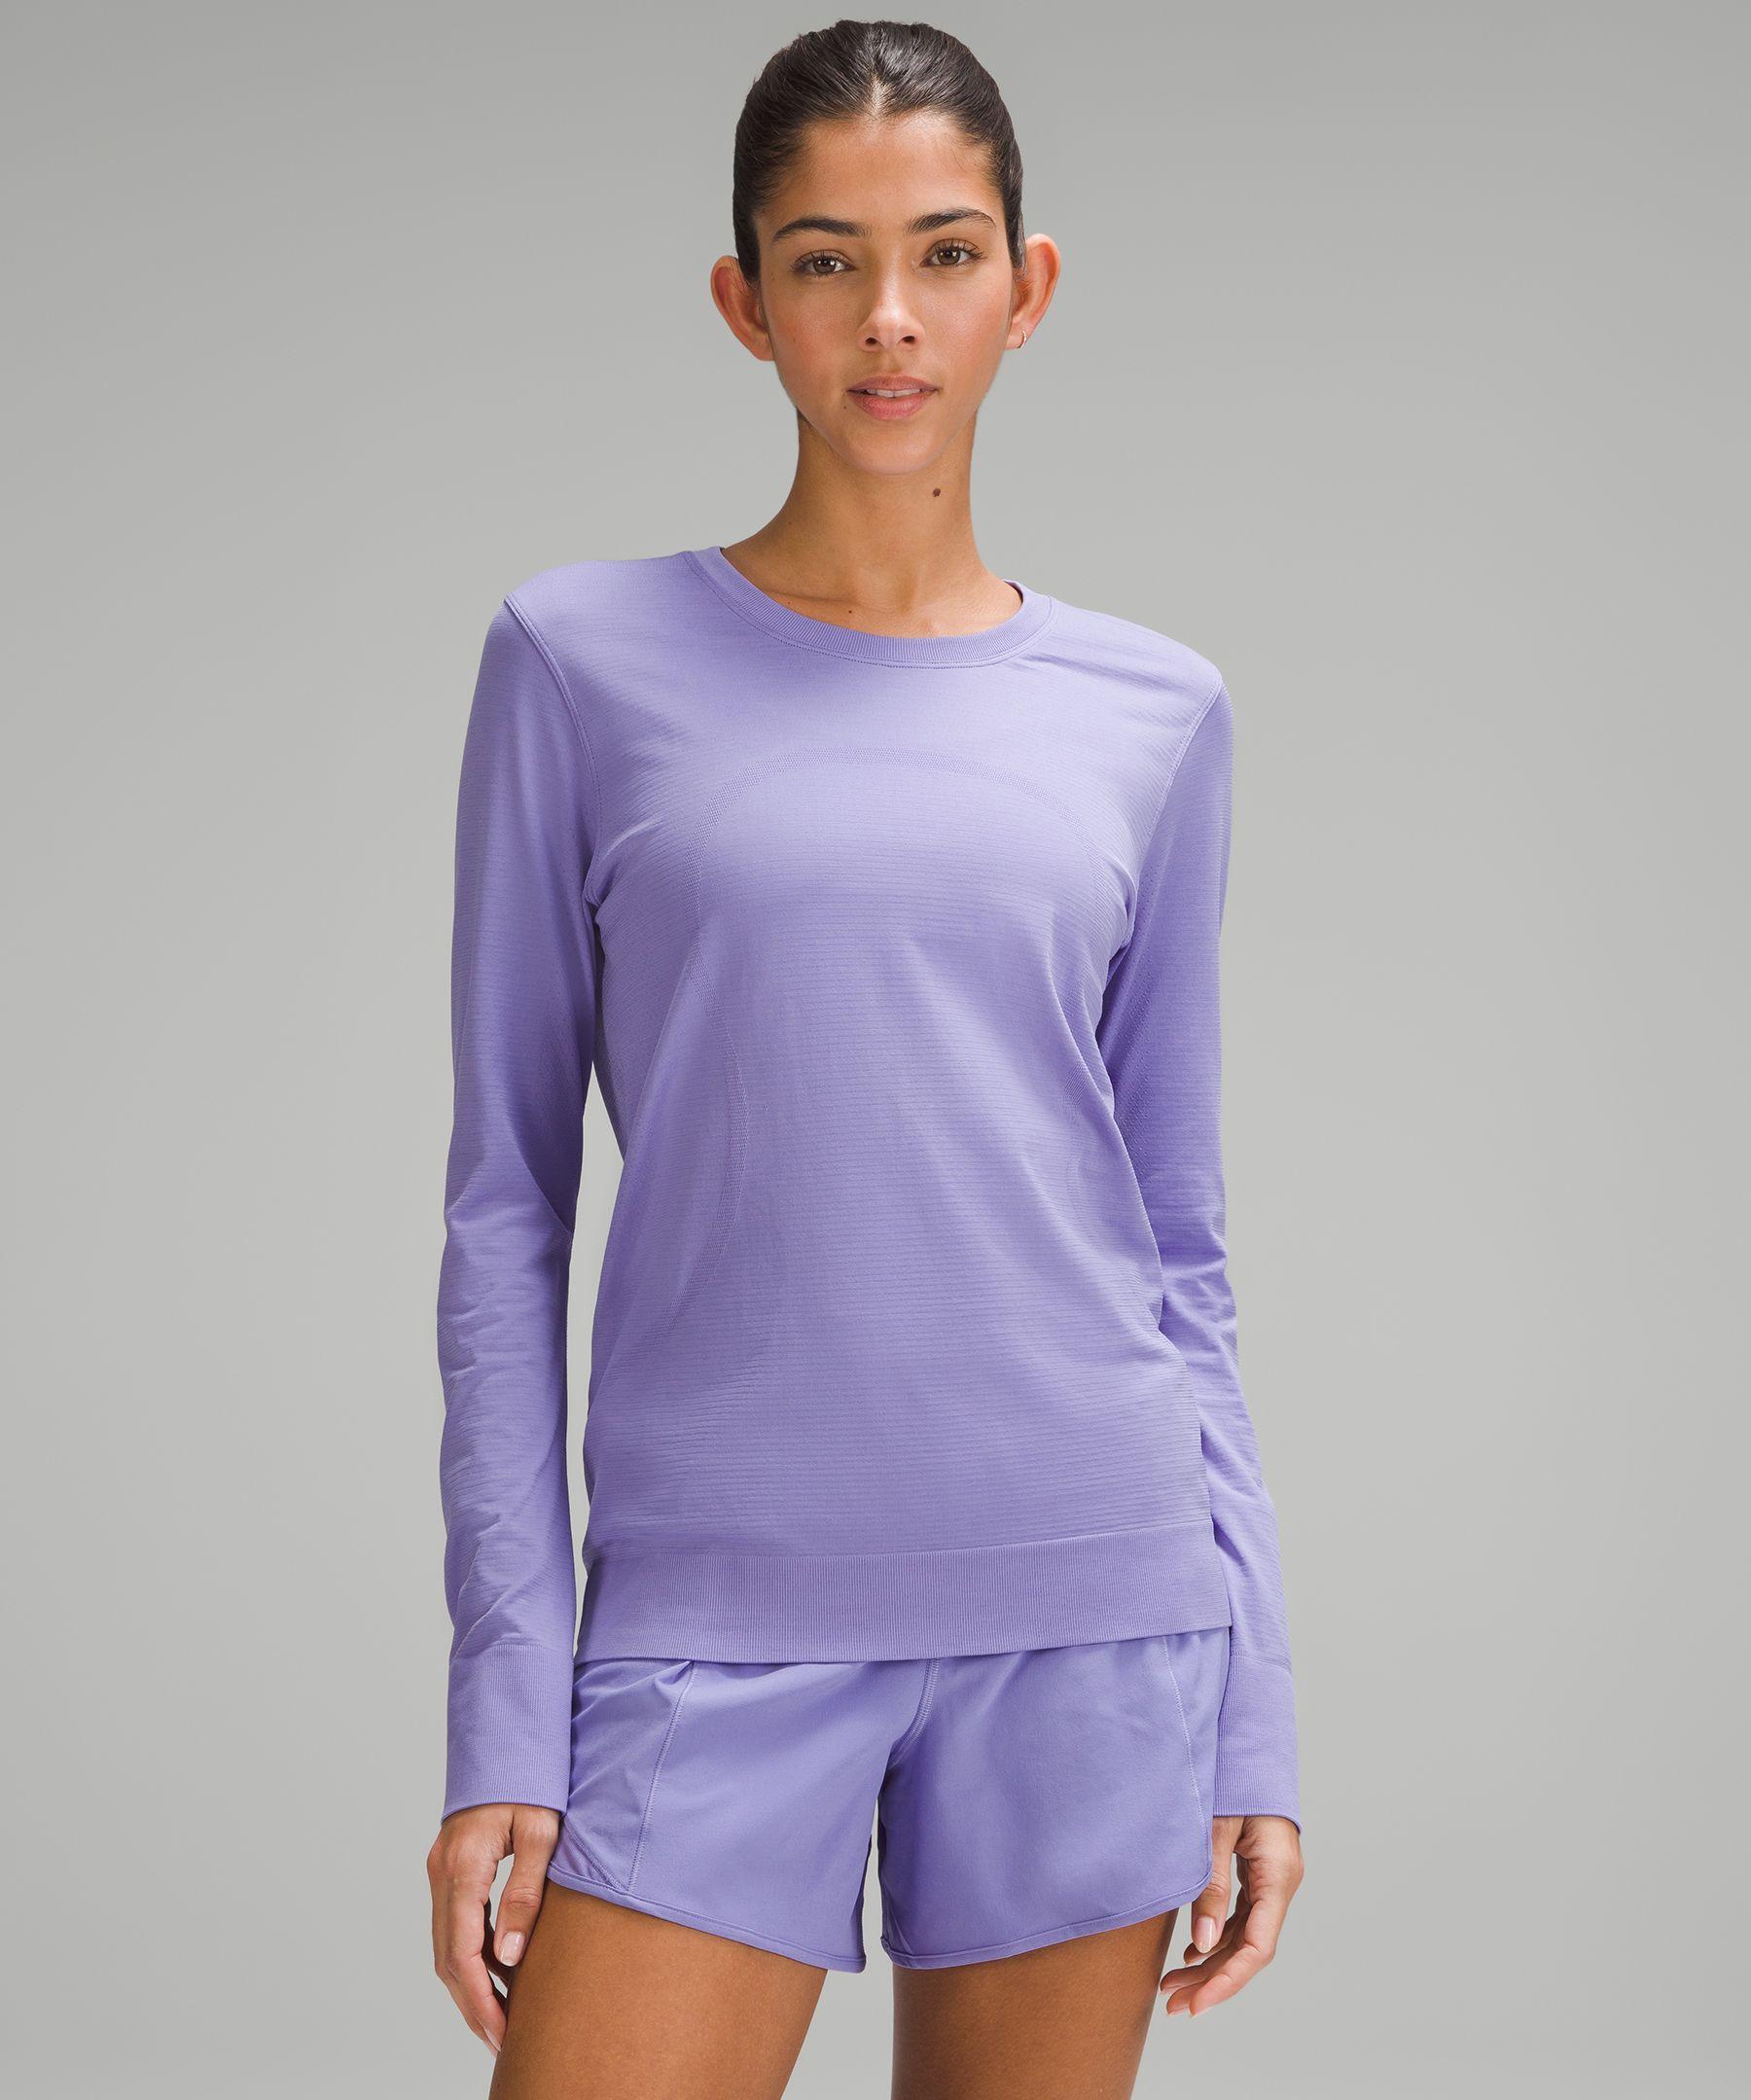 lululemon athletica Swiftly Relaxed Long-sleeve Shirt in Purple